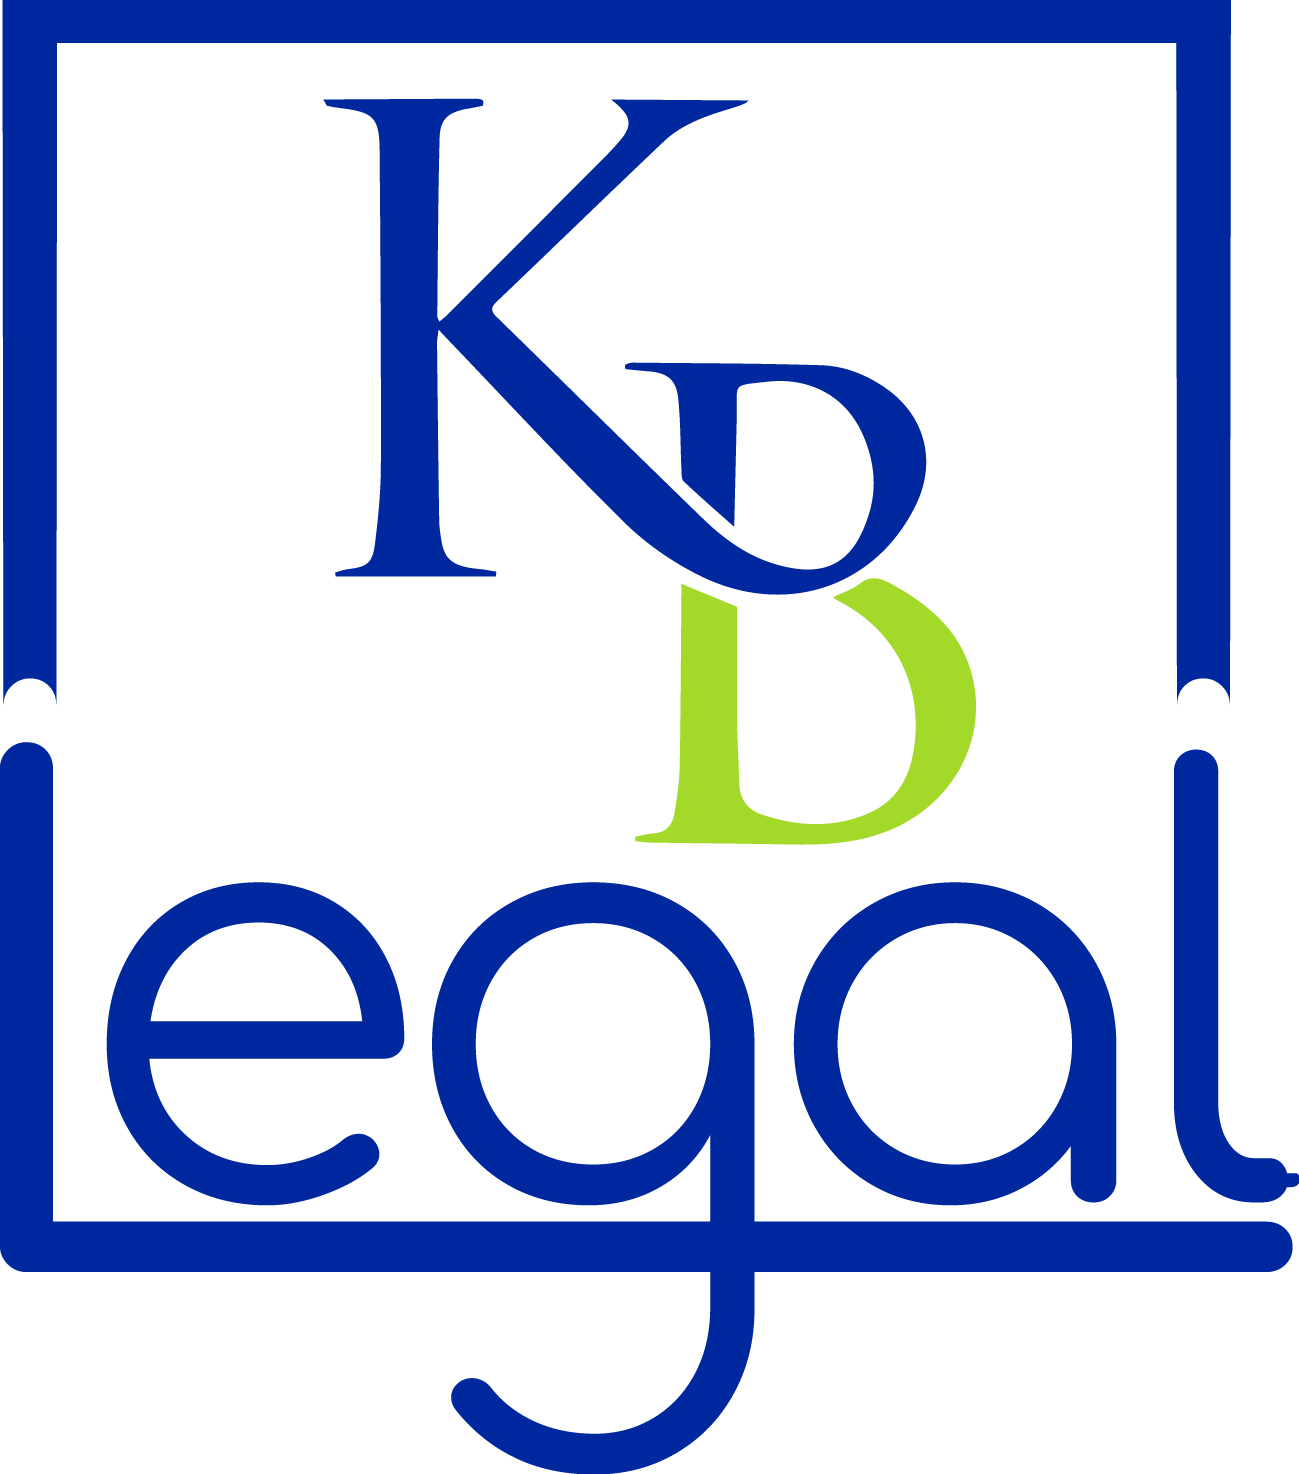 Welcome to KB-Legal - Sint Maarten based Corporate Law Firm